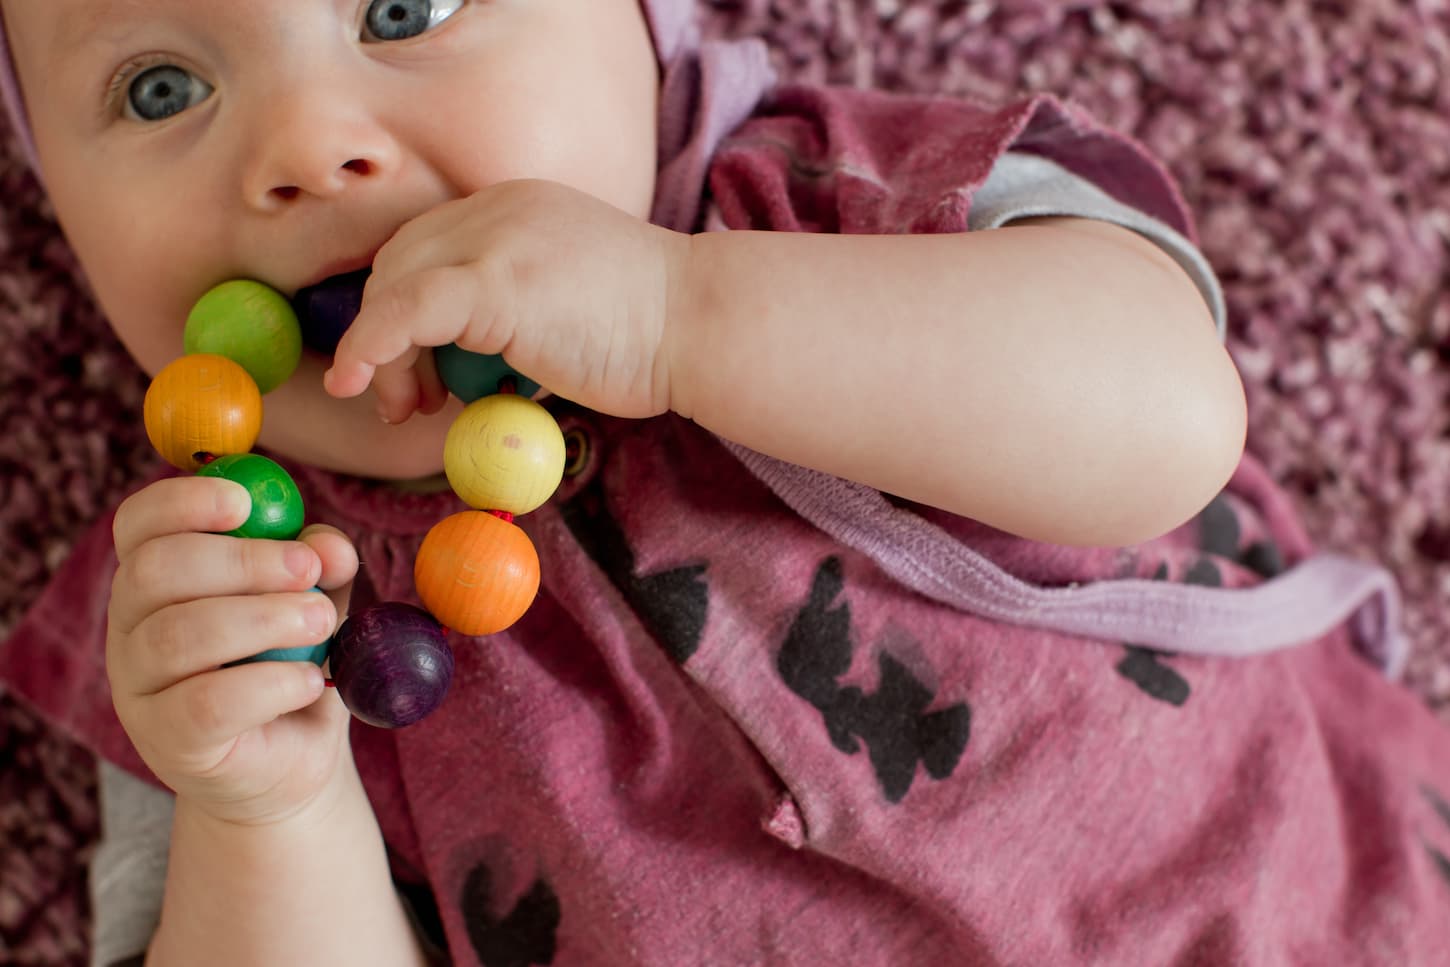 An image of a Baby girl wearing a pink bodysuit with a teething toy in her mouth.